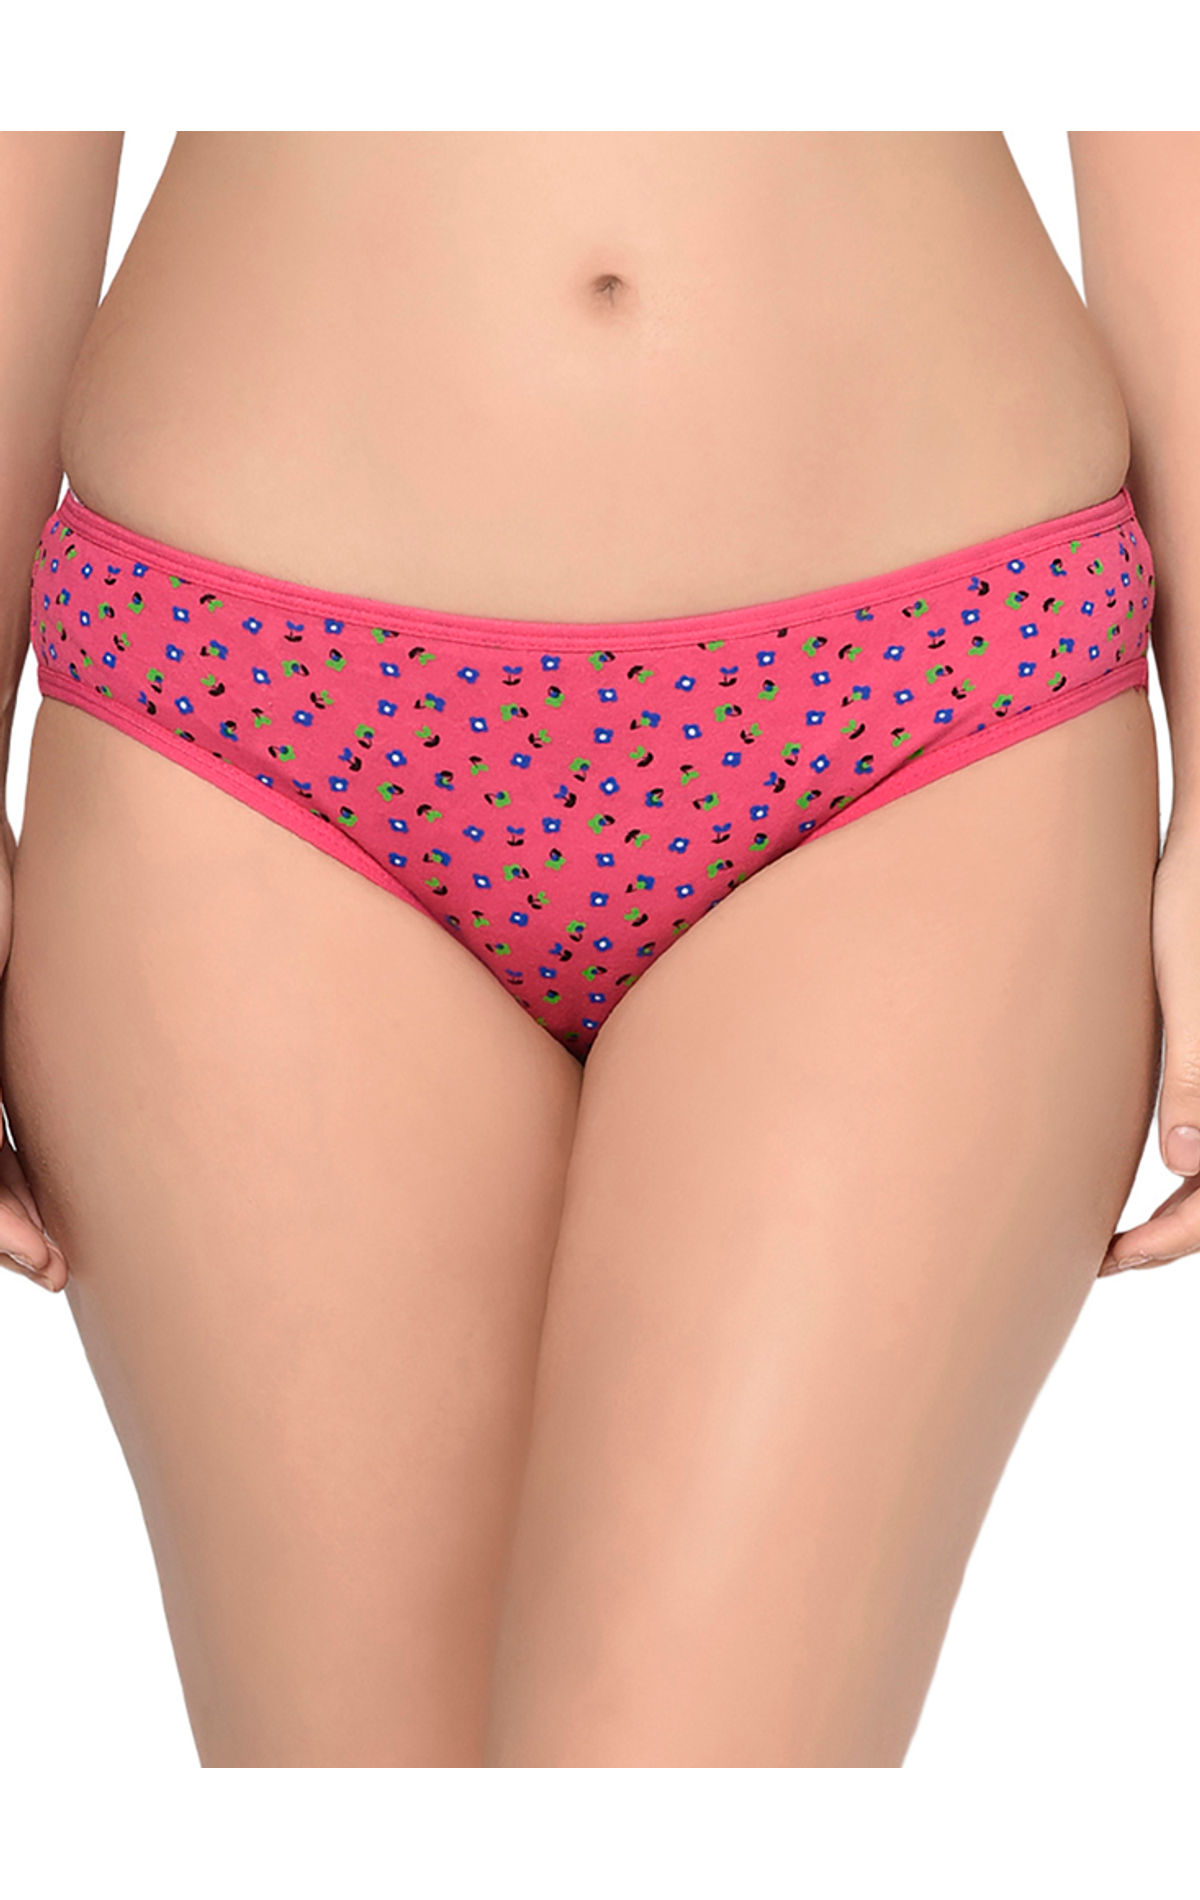 Bodycare Pack Of 3 Printed Panty In Assorted Colors-8579b-3pcs, 8579b-3pcs